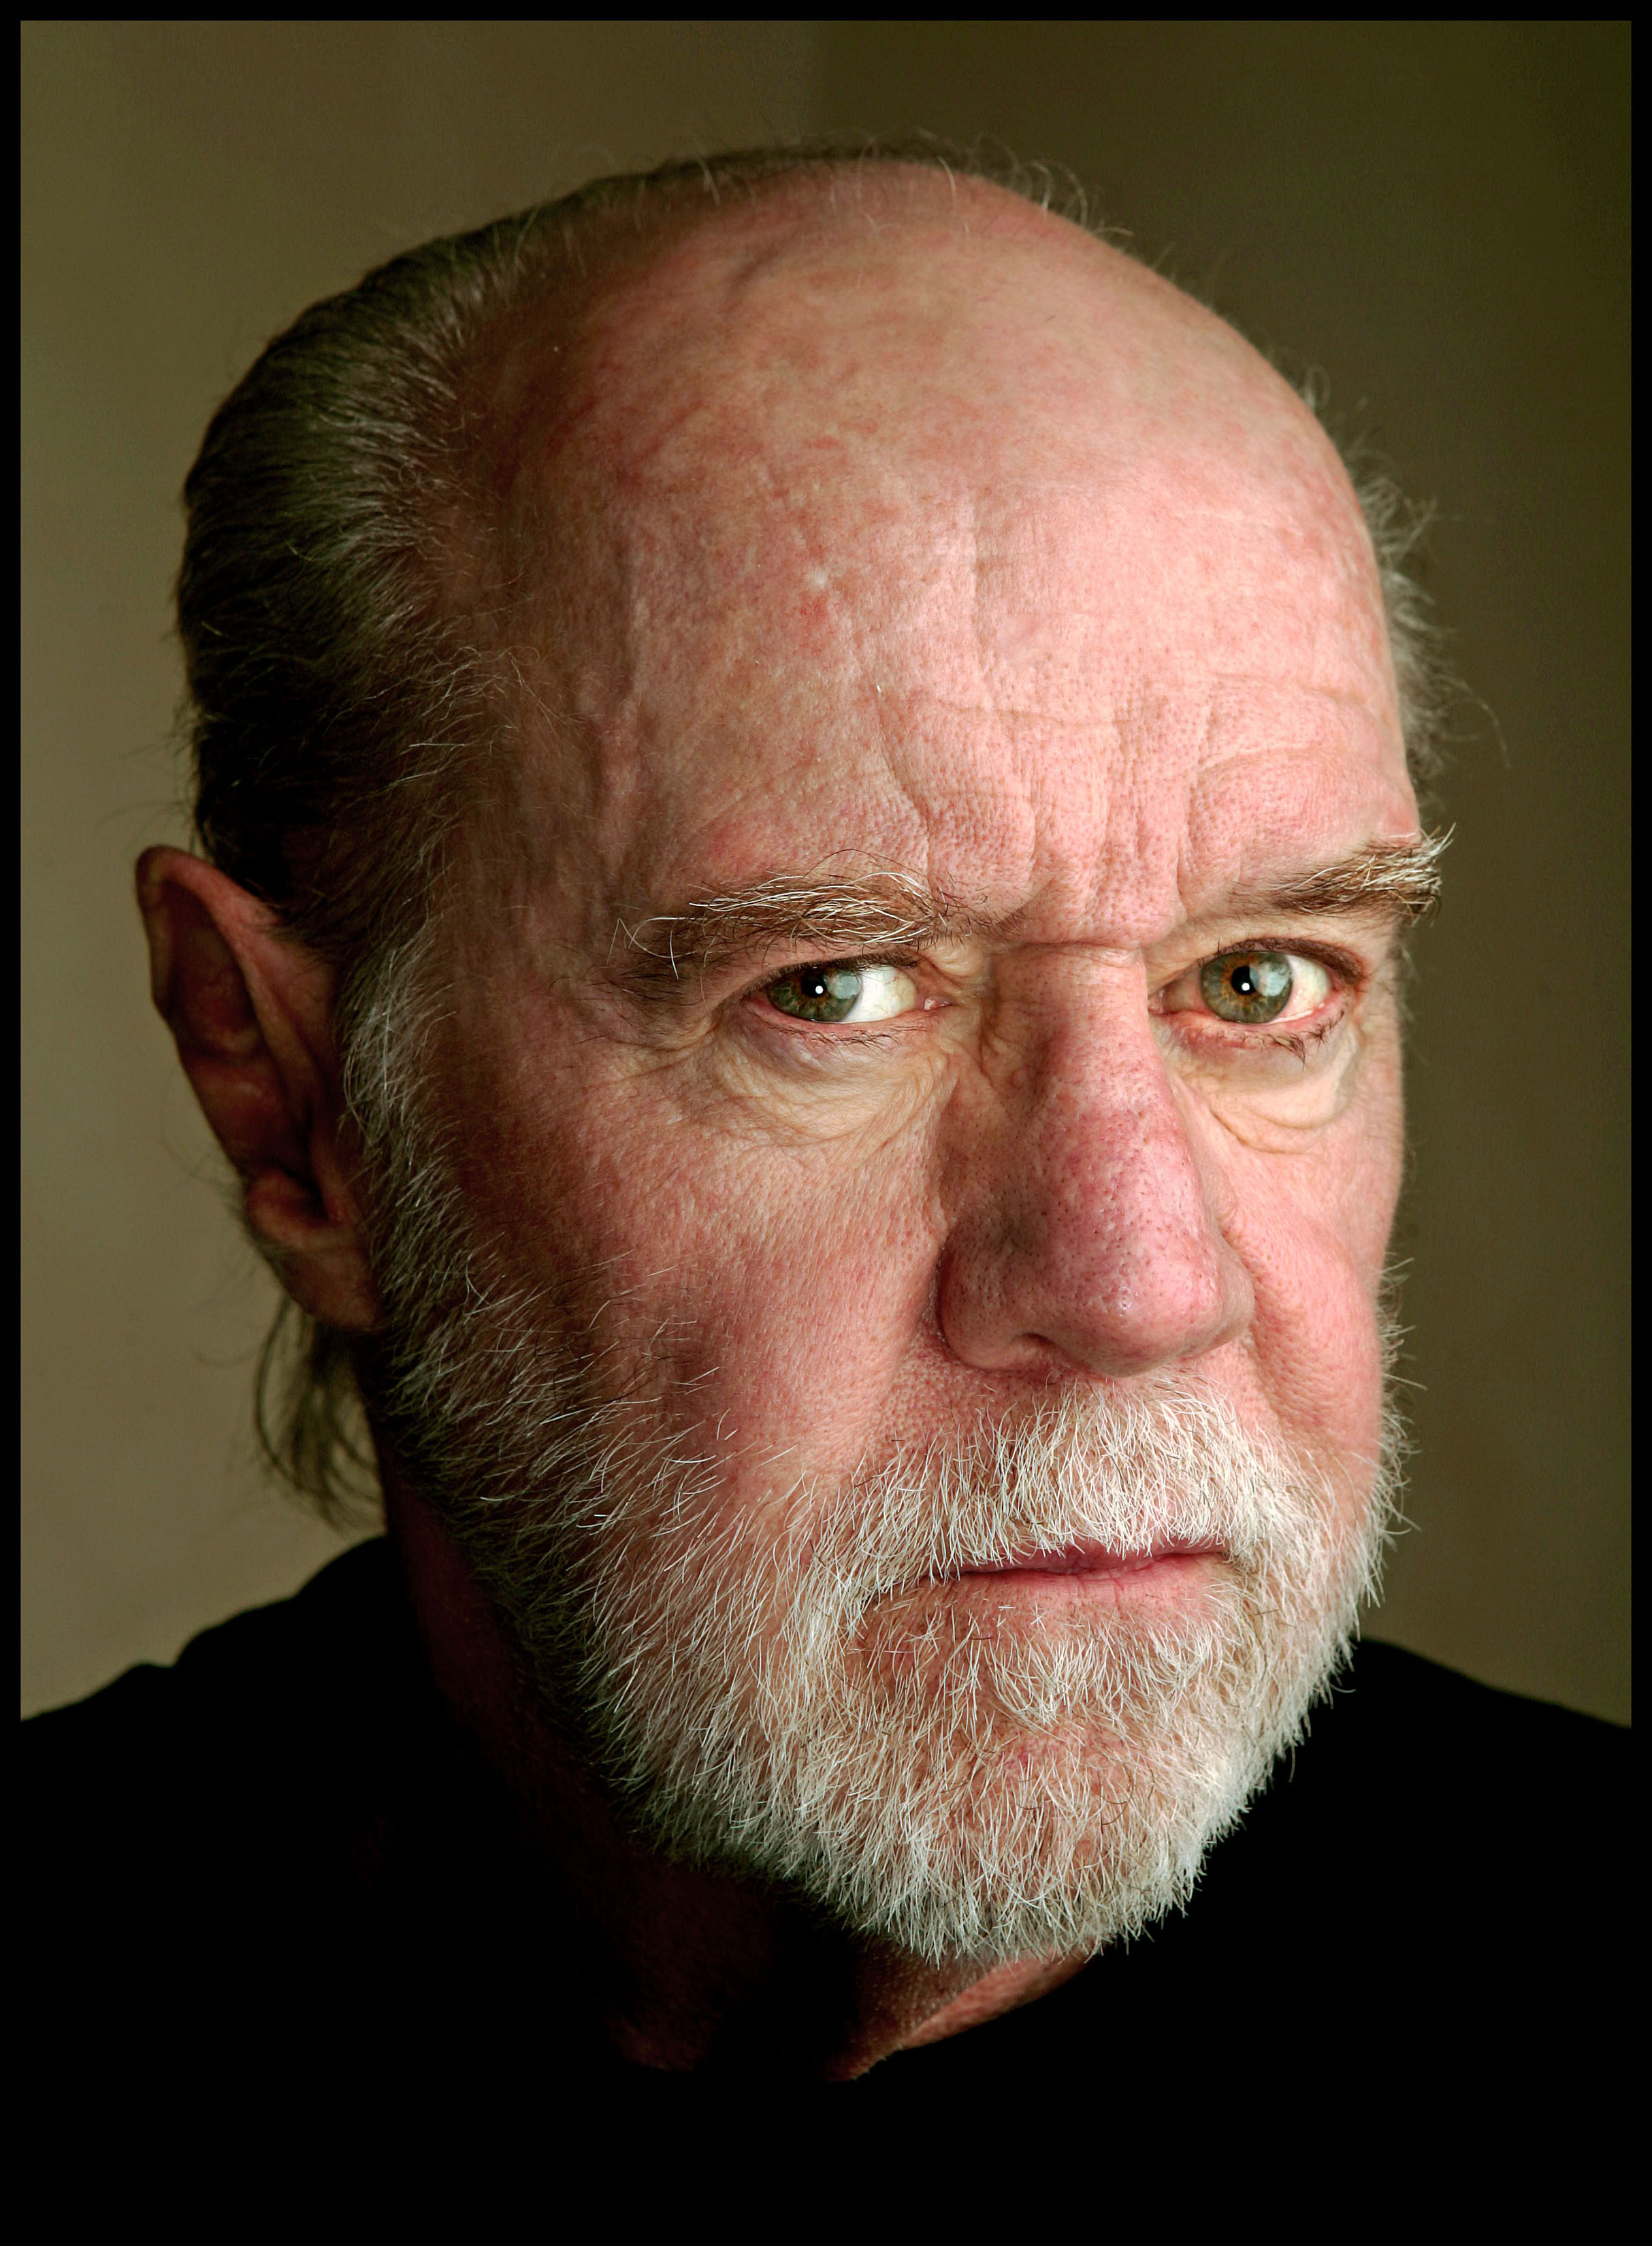 George Carlin - HD Images and Wallpapers